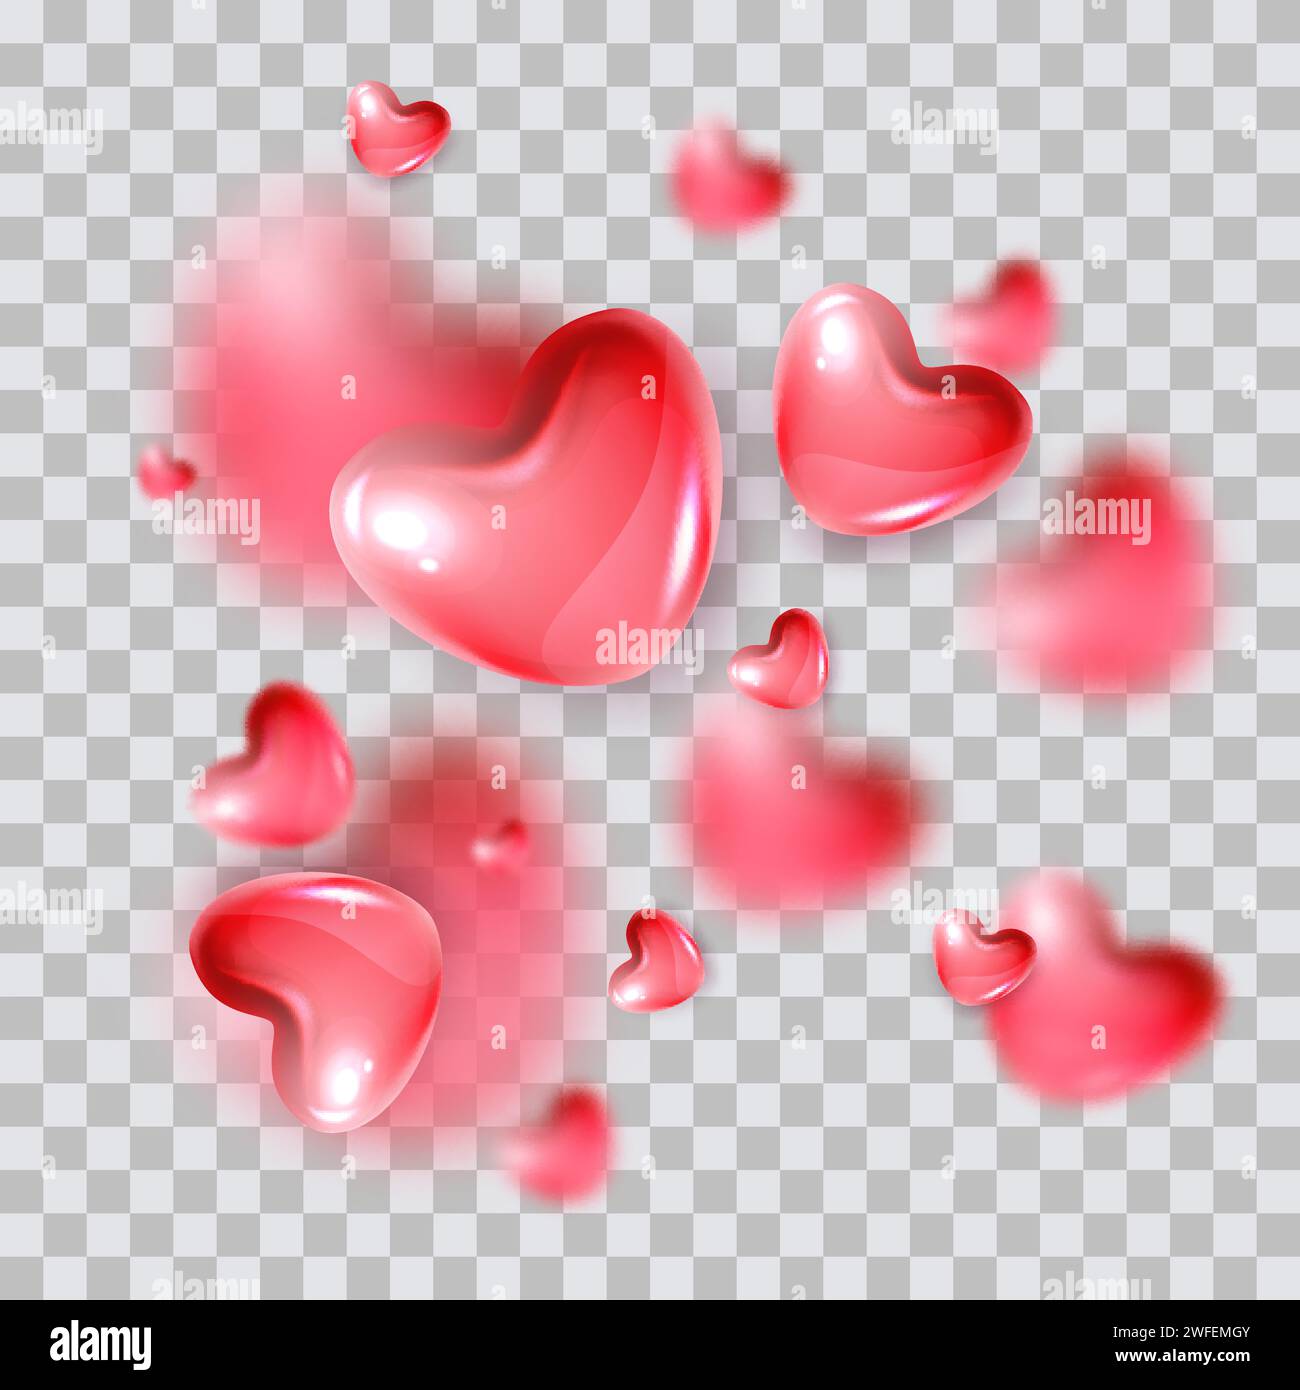 Red realistic 3d glass blurred hearts. Vector glossy plastic design elements. Heart shape isolated on transparent background Stock Vector